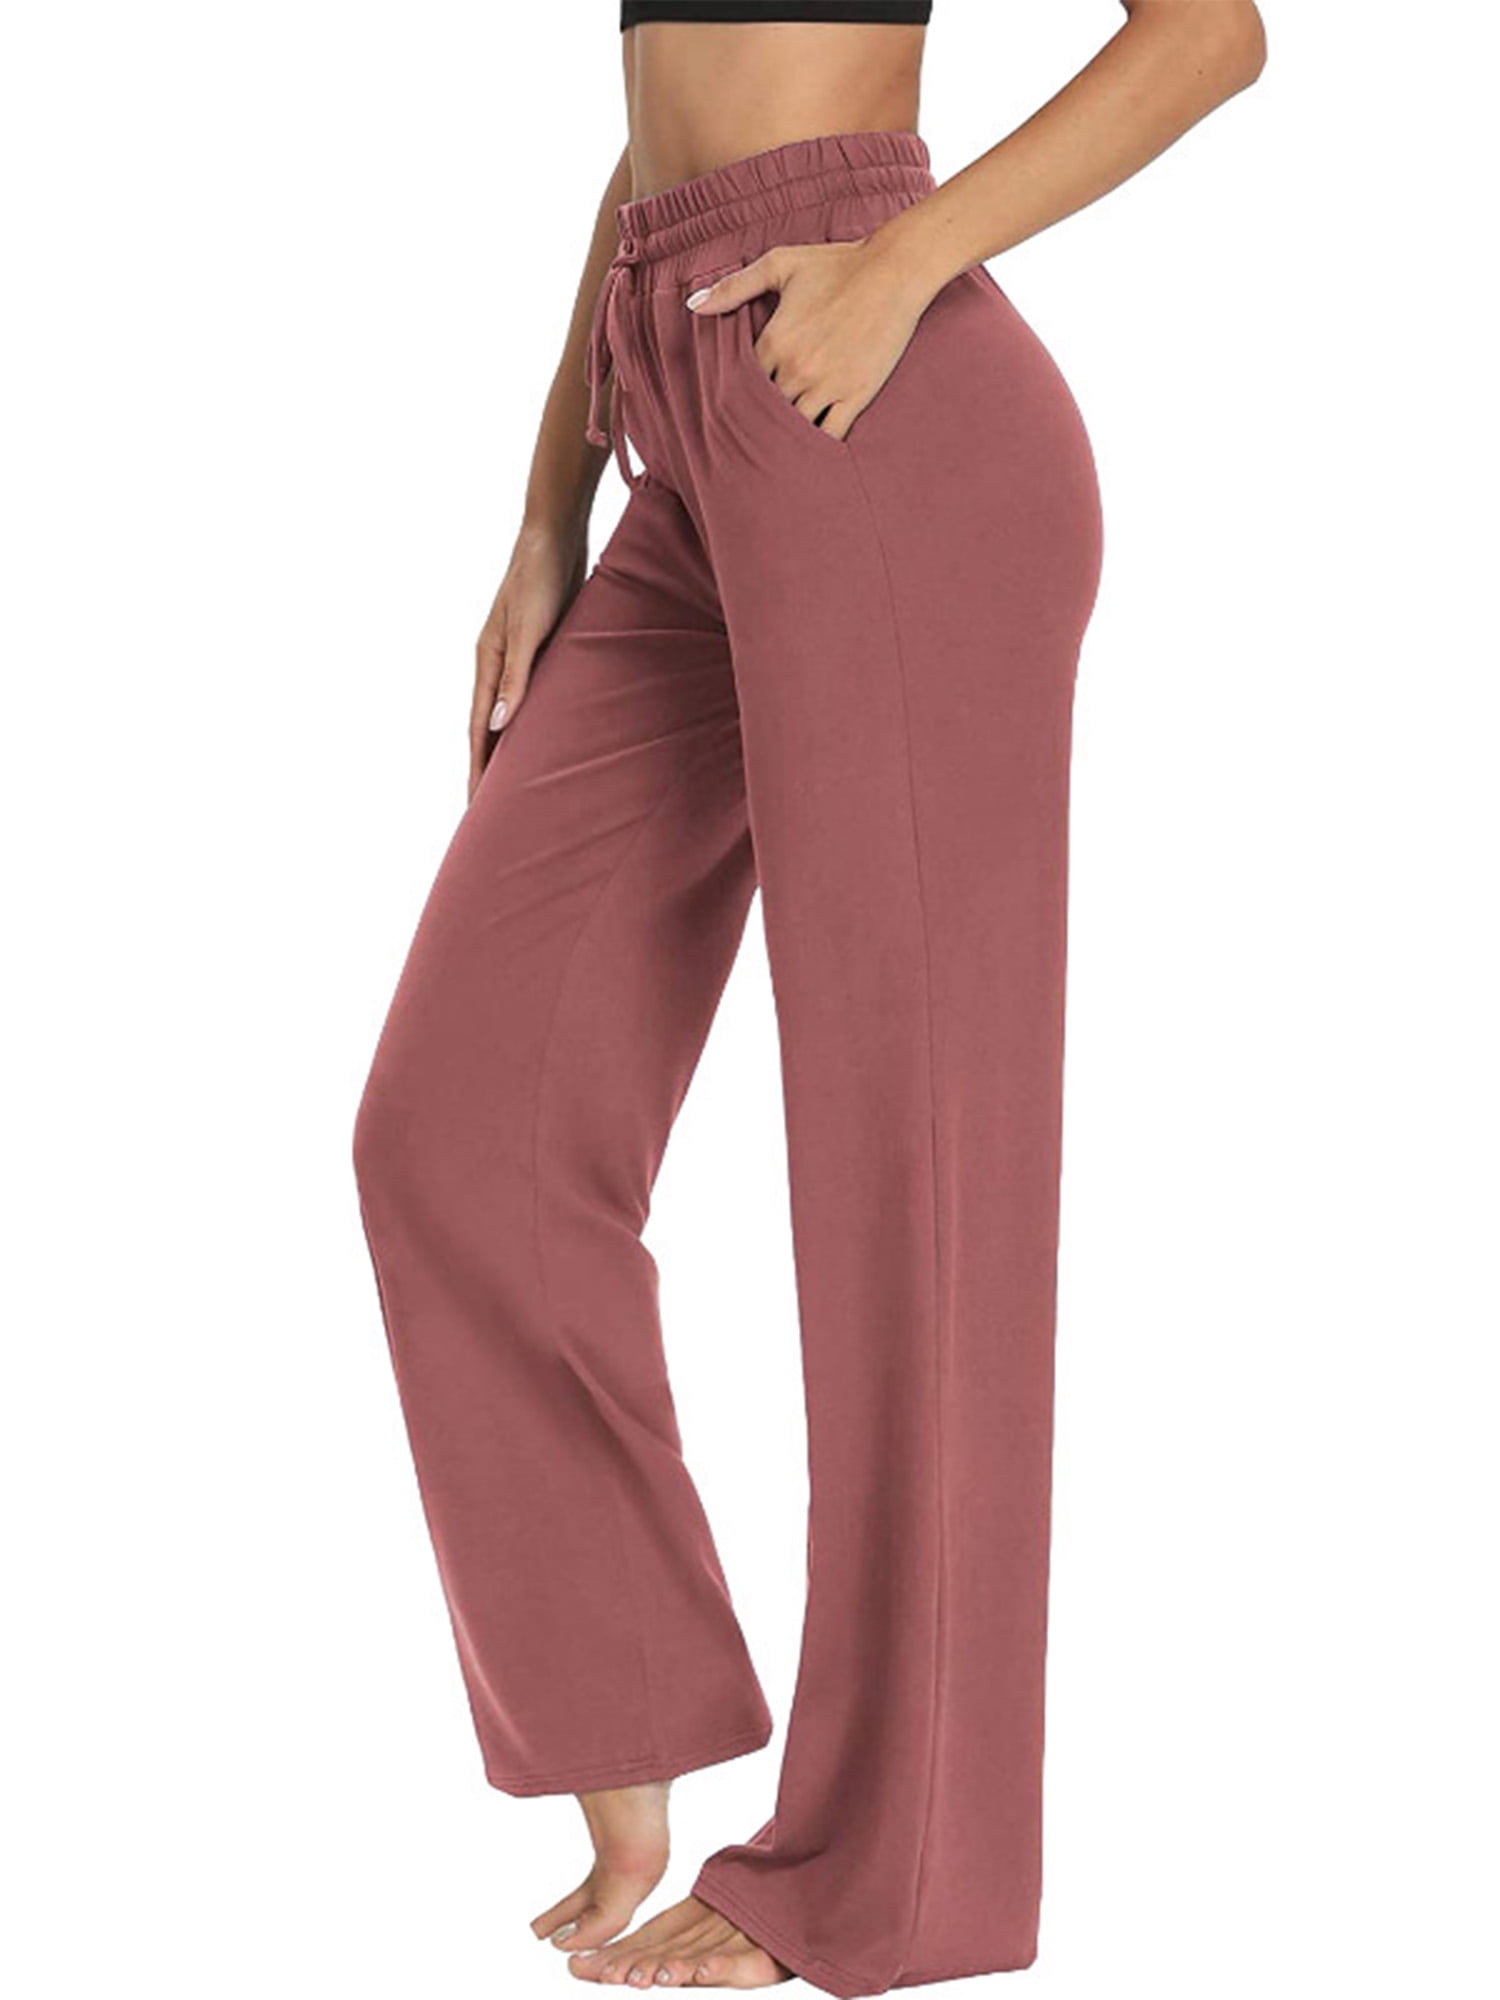 DODOING Women's Casual Yoga Pants Loose Fit Style Trousers Wide